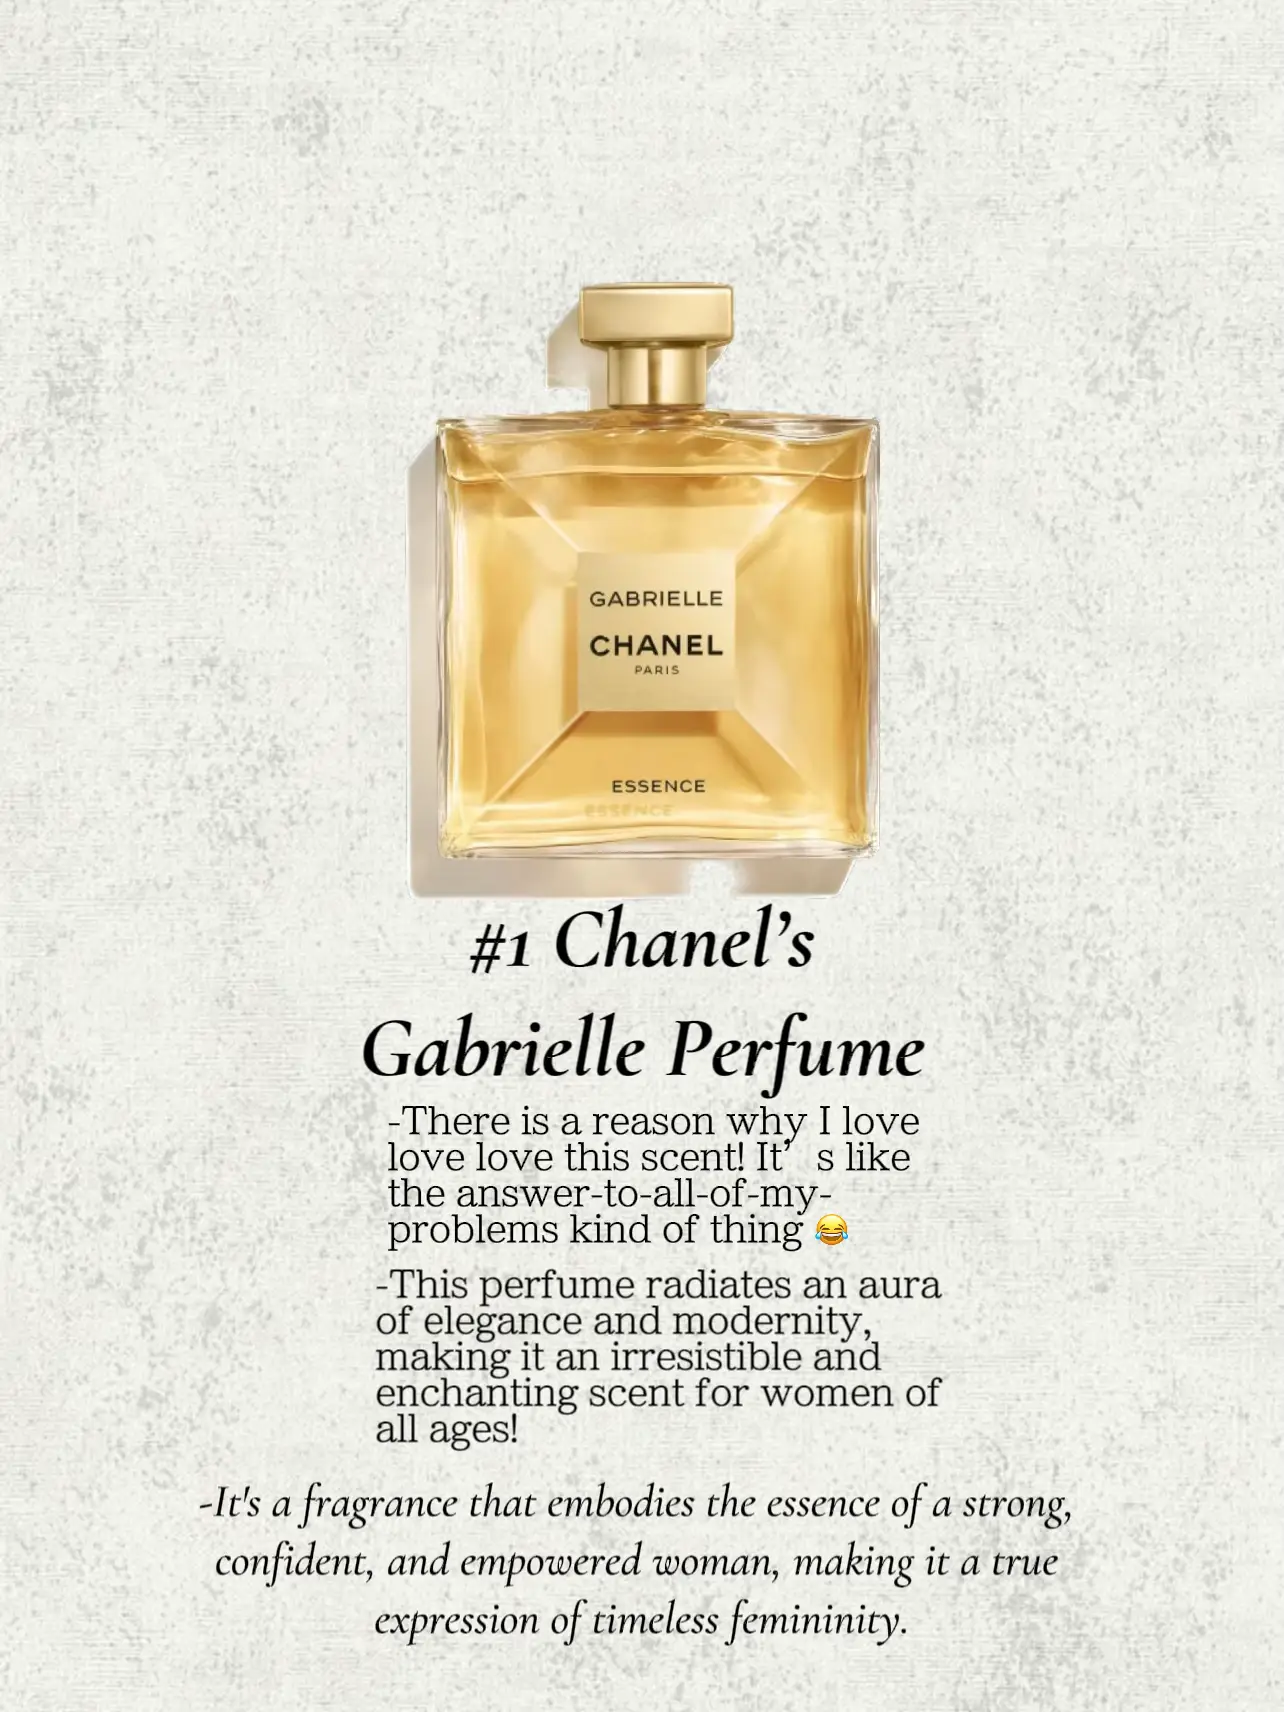 The Light Fantastic: Why We Love Chanel's Gabrielle Perfume - The